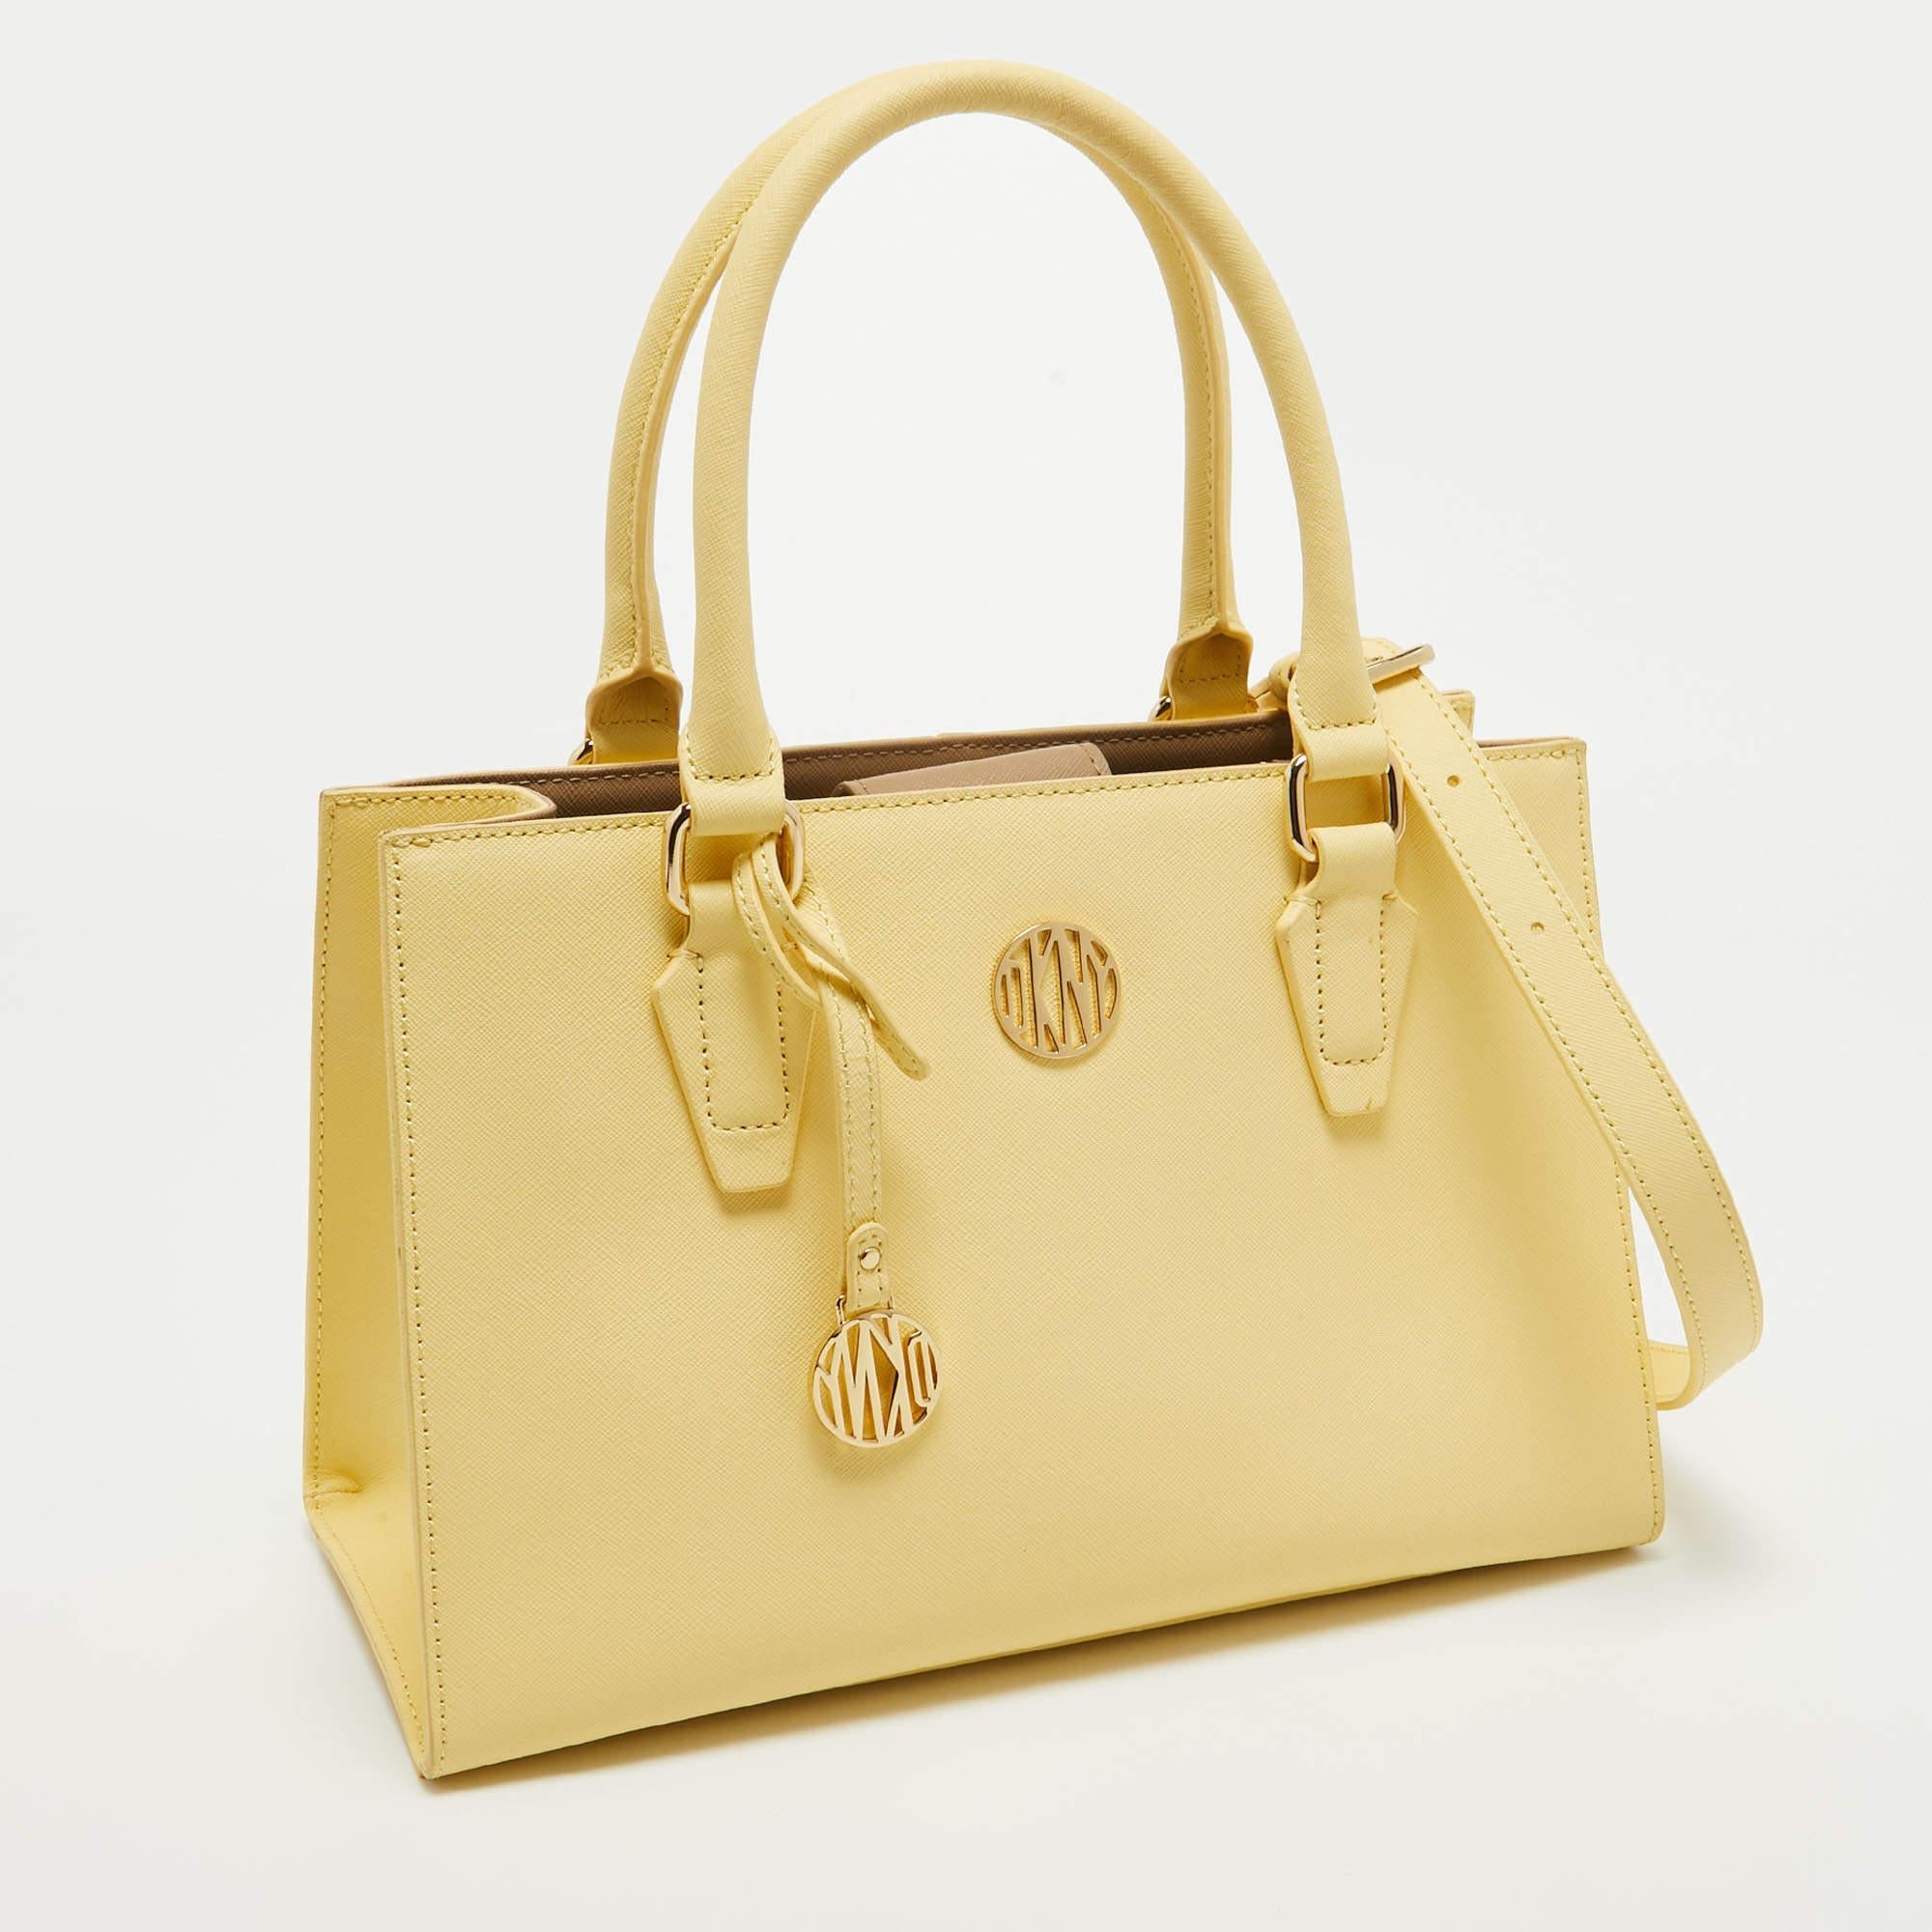 Dkny Yellow Leather Tote 9